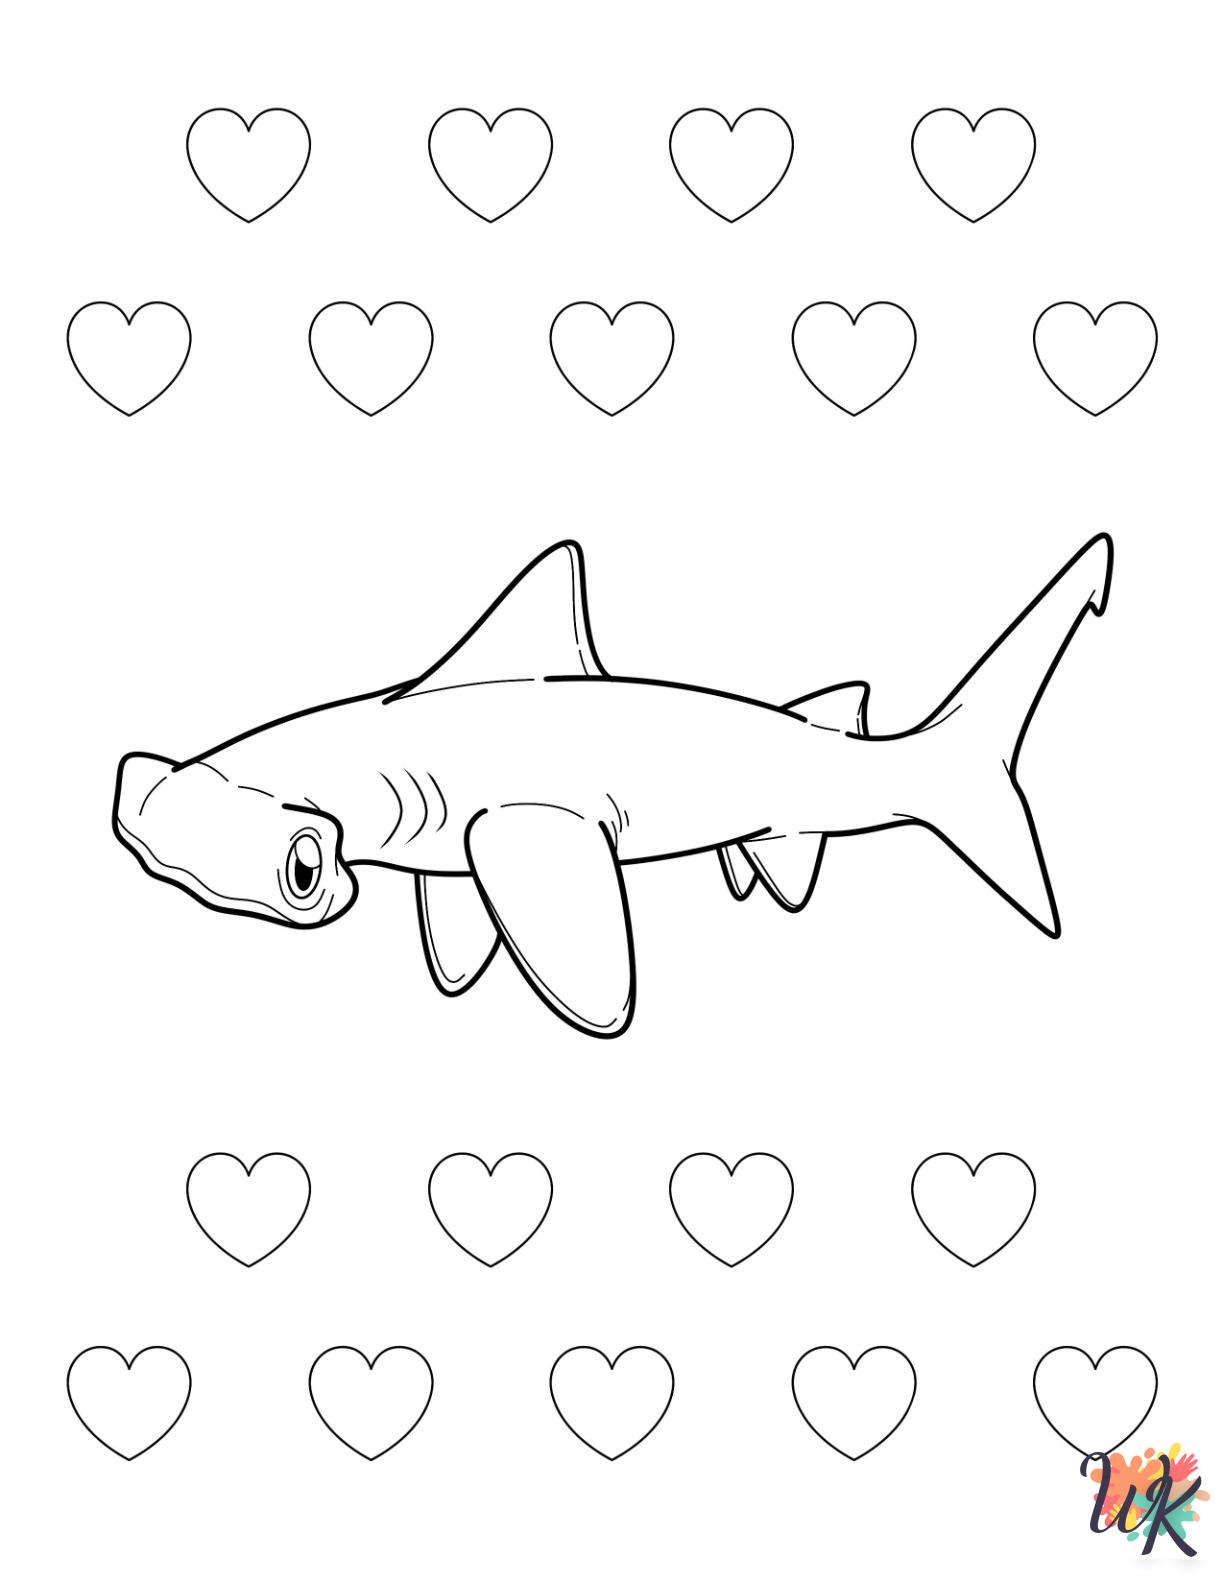 old-fashioned Hammerhead Shark coloring pages